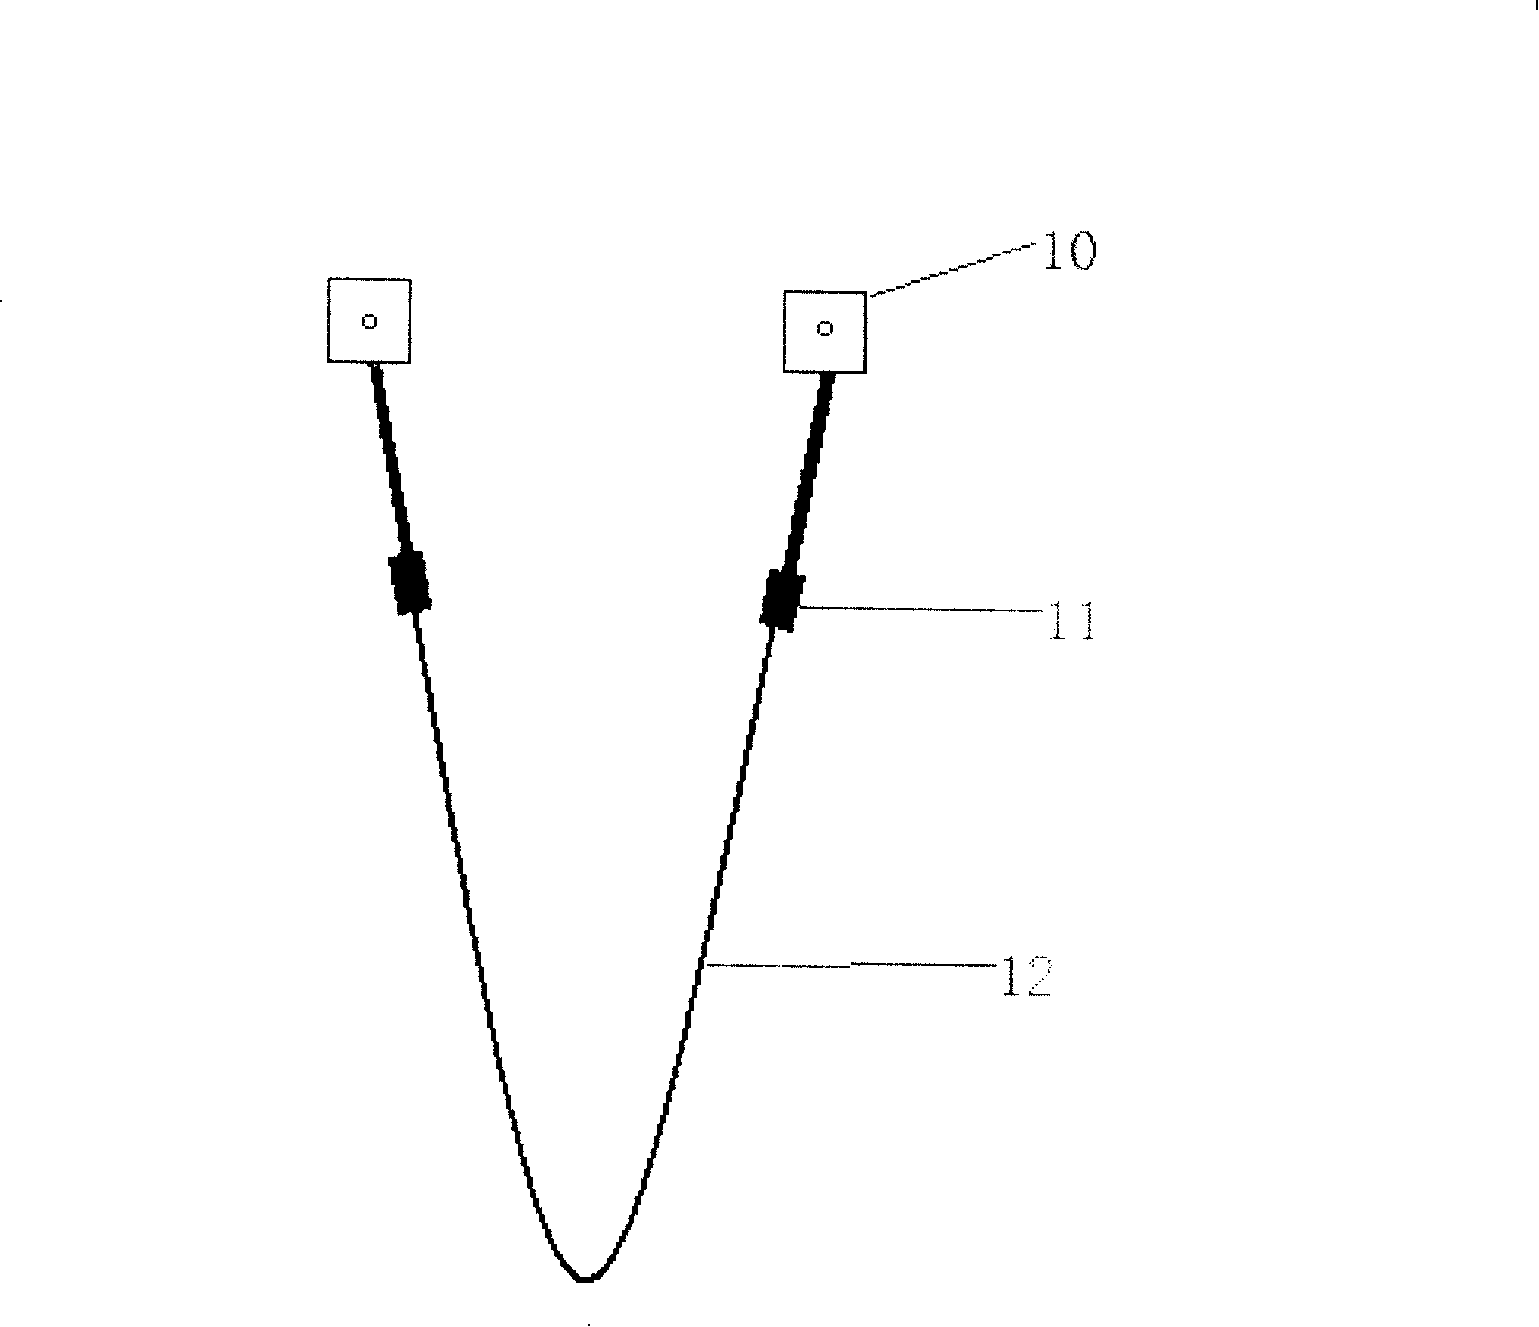 Air ground line downward link and method for ground line assembly